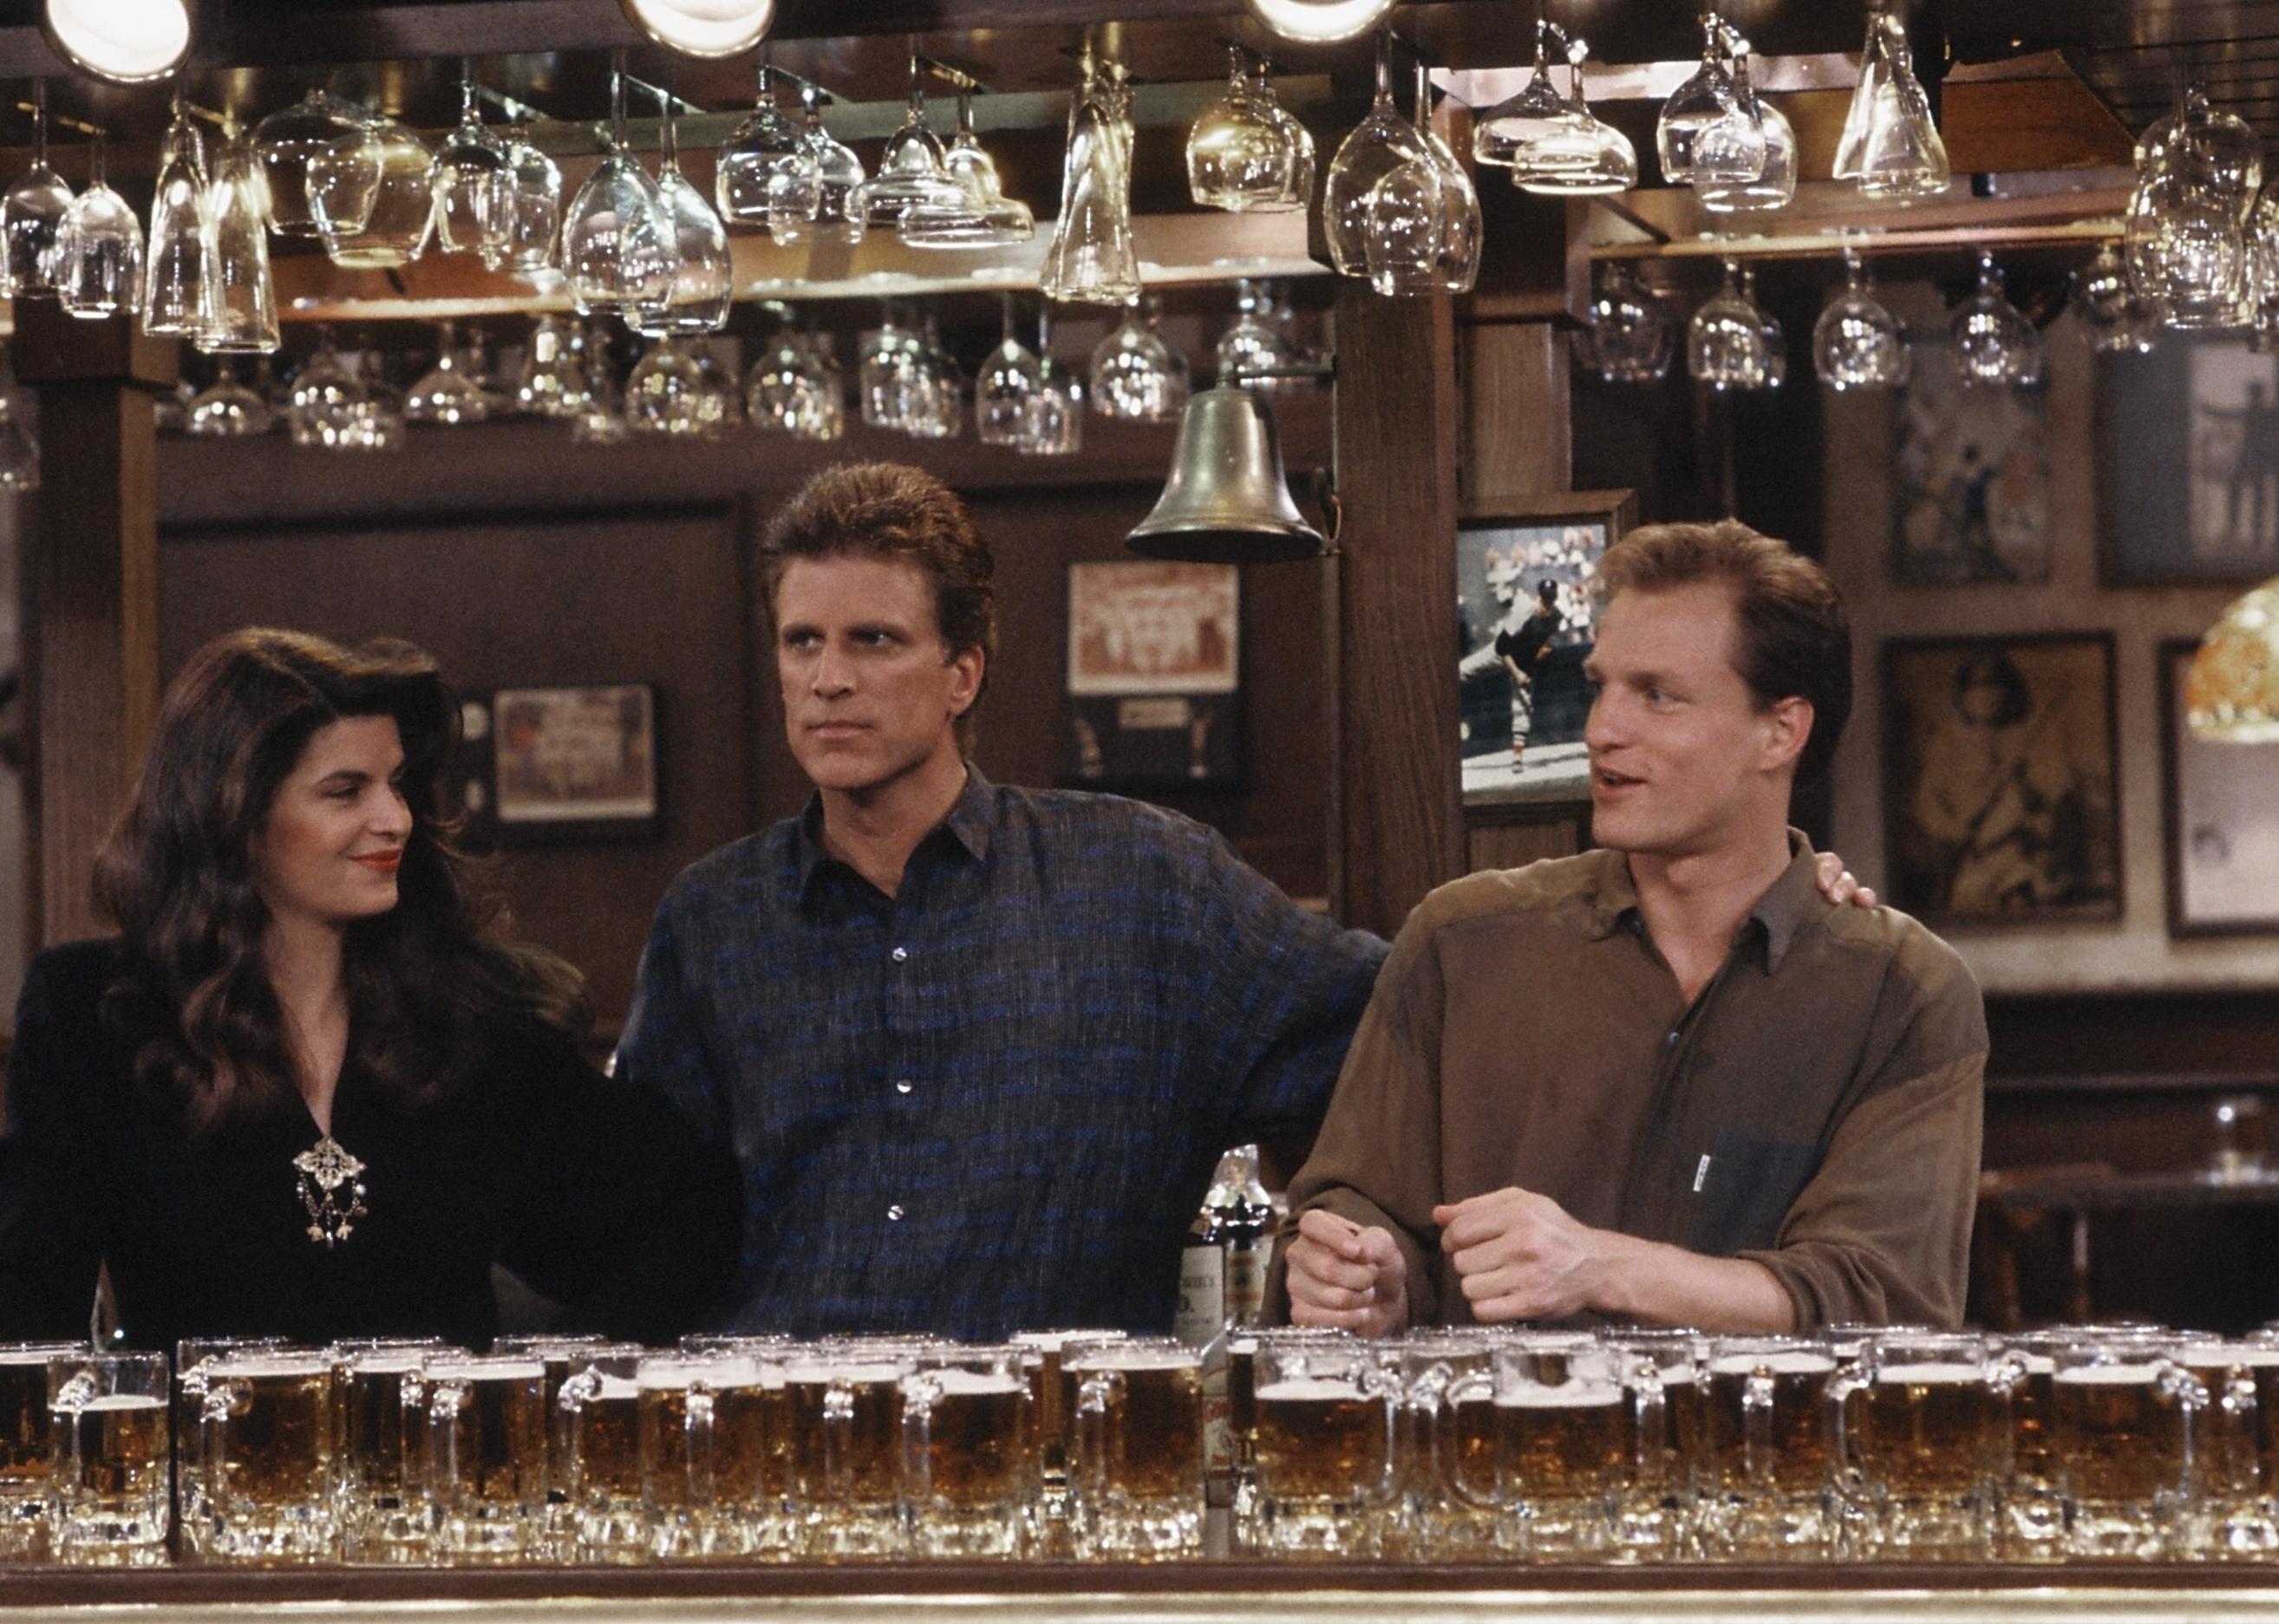 Kirstie Alley, Woody Harrelson, and Ted Danson smiling behind a bar.